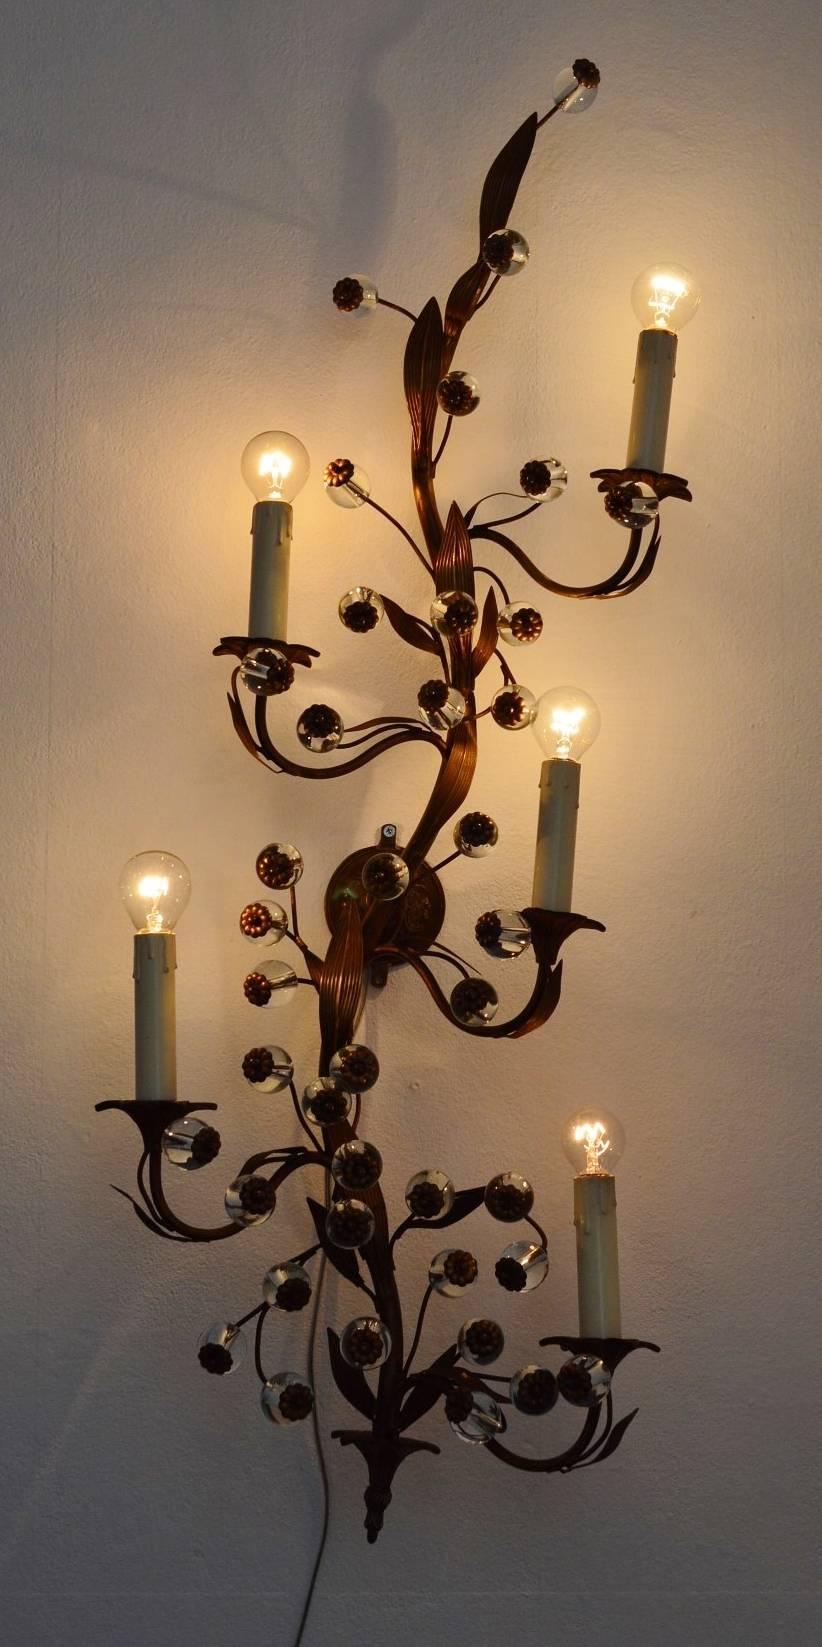 Hugh wall sconce with full brass decorative leafs and flower details on transparent Murano glass balls.
The wall lamp in the shape of a big flower rod with leaves and flowers has five arms with bulb holders for small candelabra bulbs.
Very